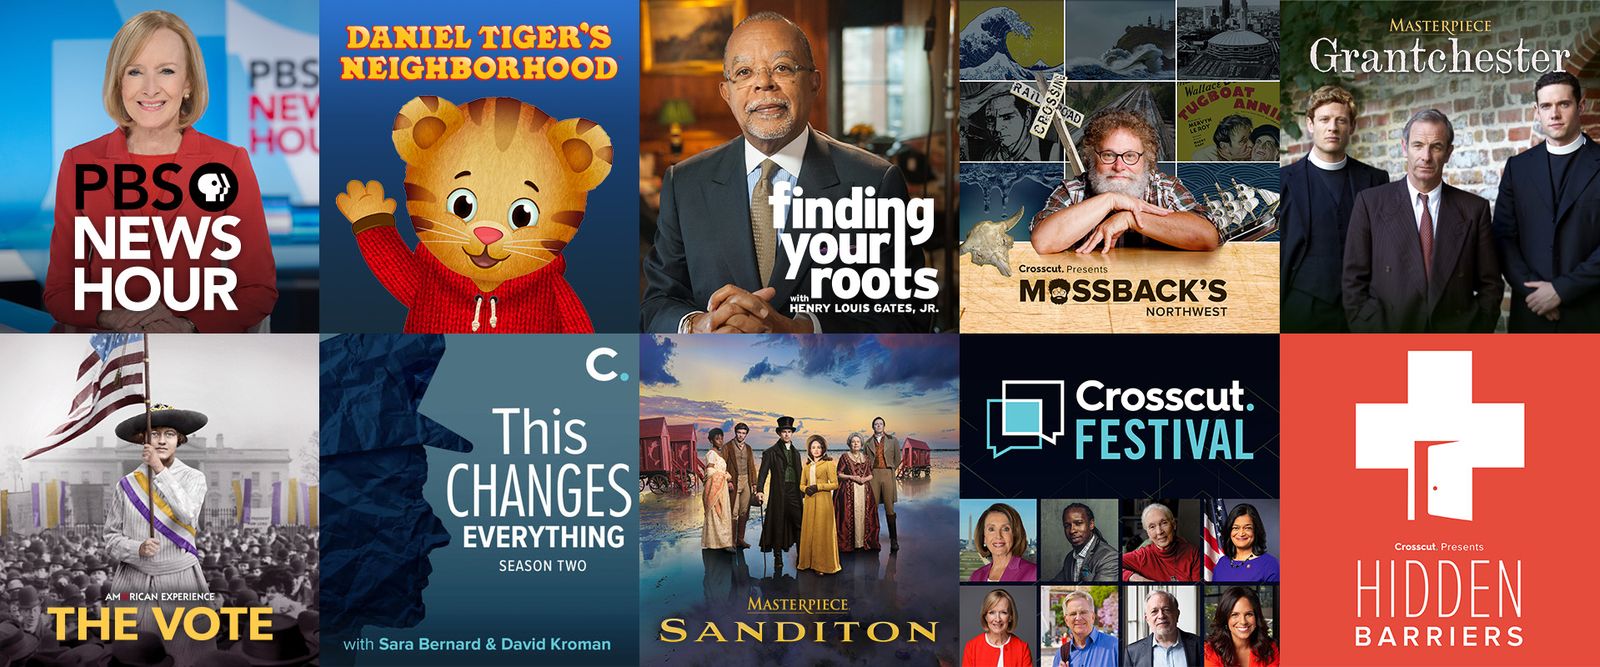 A grid of content from Cascade Public Media: PBS Newshour, Daniel Tiger's Neighborhood, Finding your roots, Mossback's Northwest, Grantchester, The Vote, This Changes Everything, Sandition, Crosscut Festival, Hidden Barriers